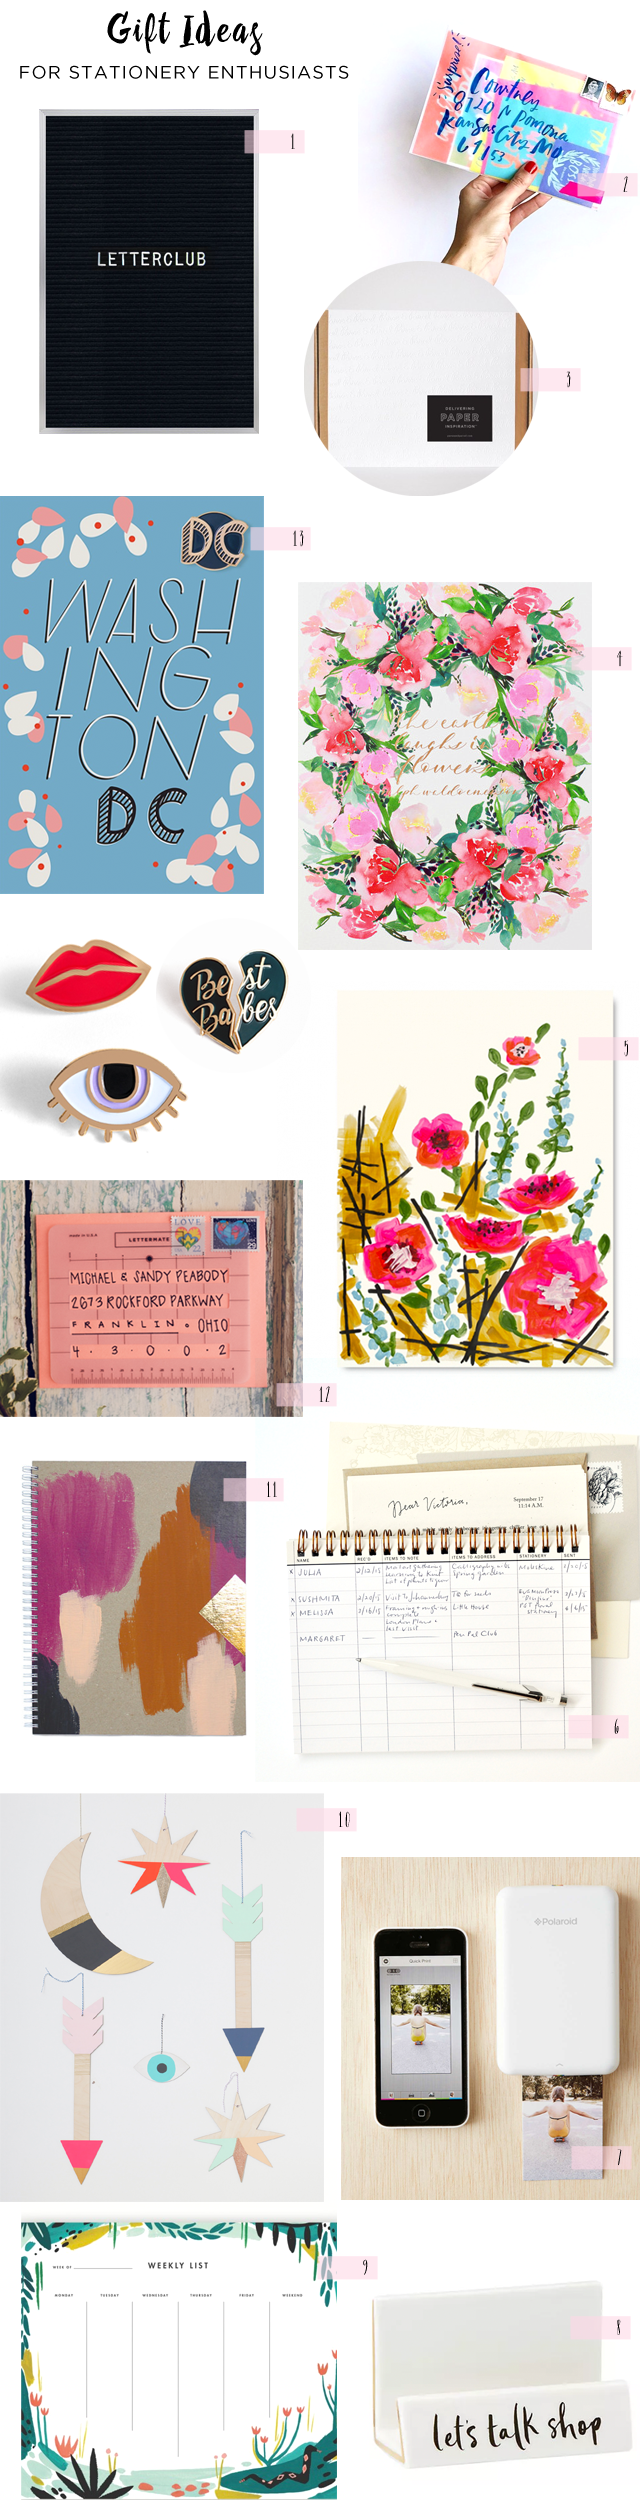 2015 Gift Guide: Gift Ideas for Stationery Enthusiasts / Oh So Beautiful Paper